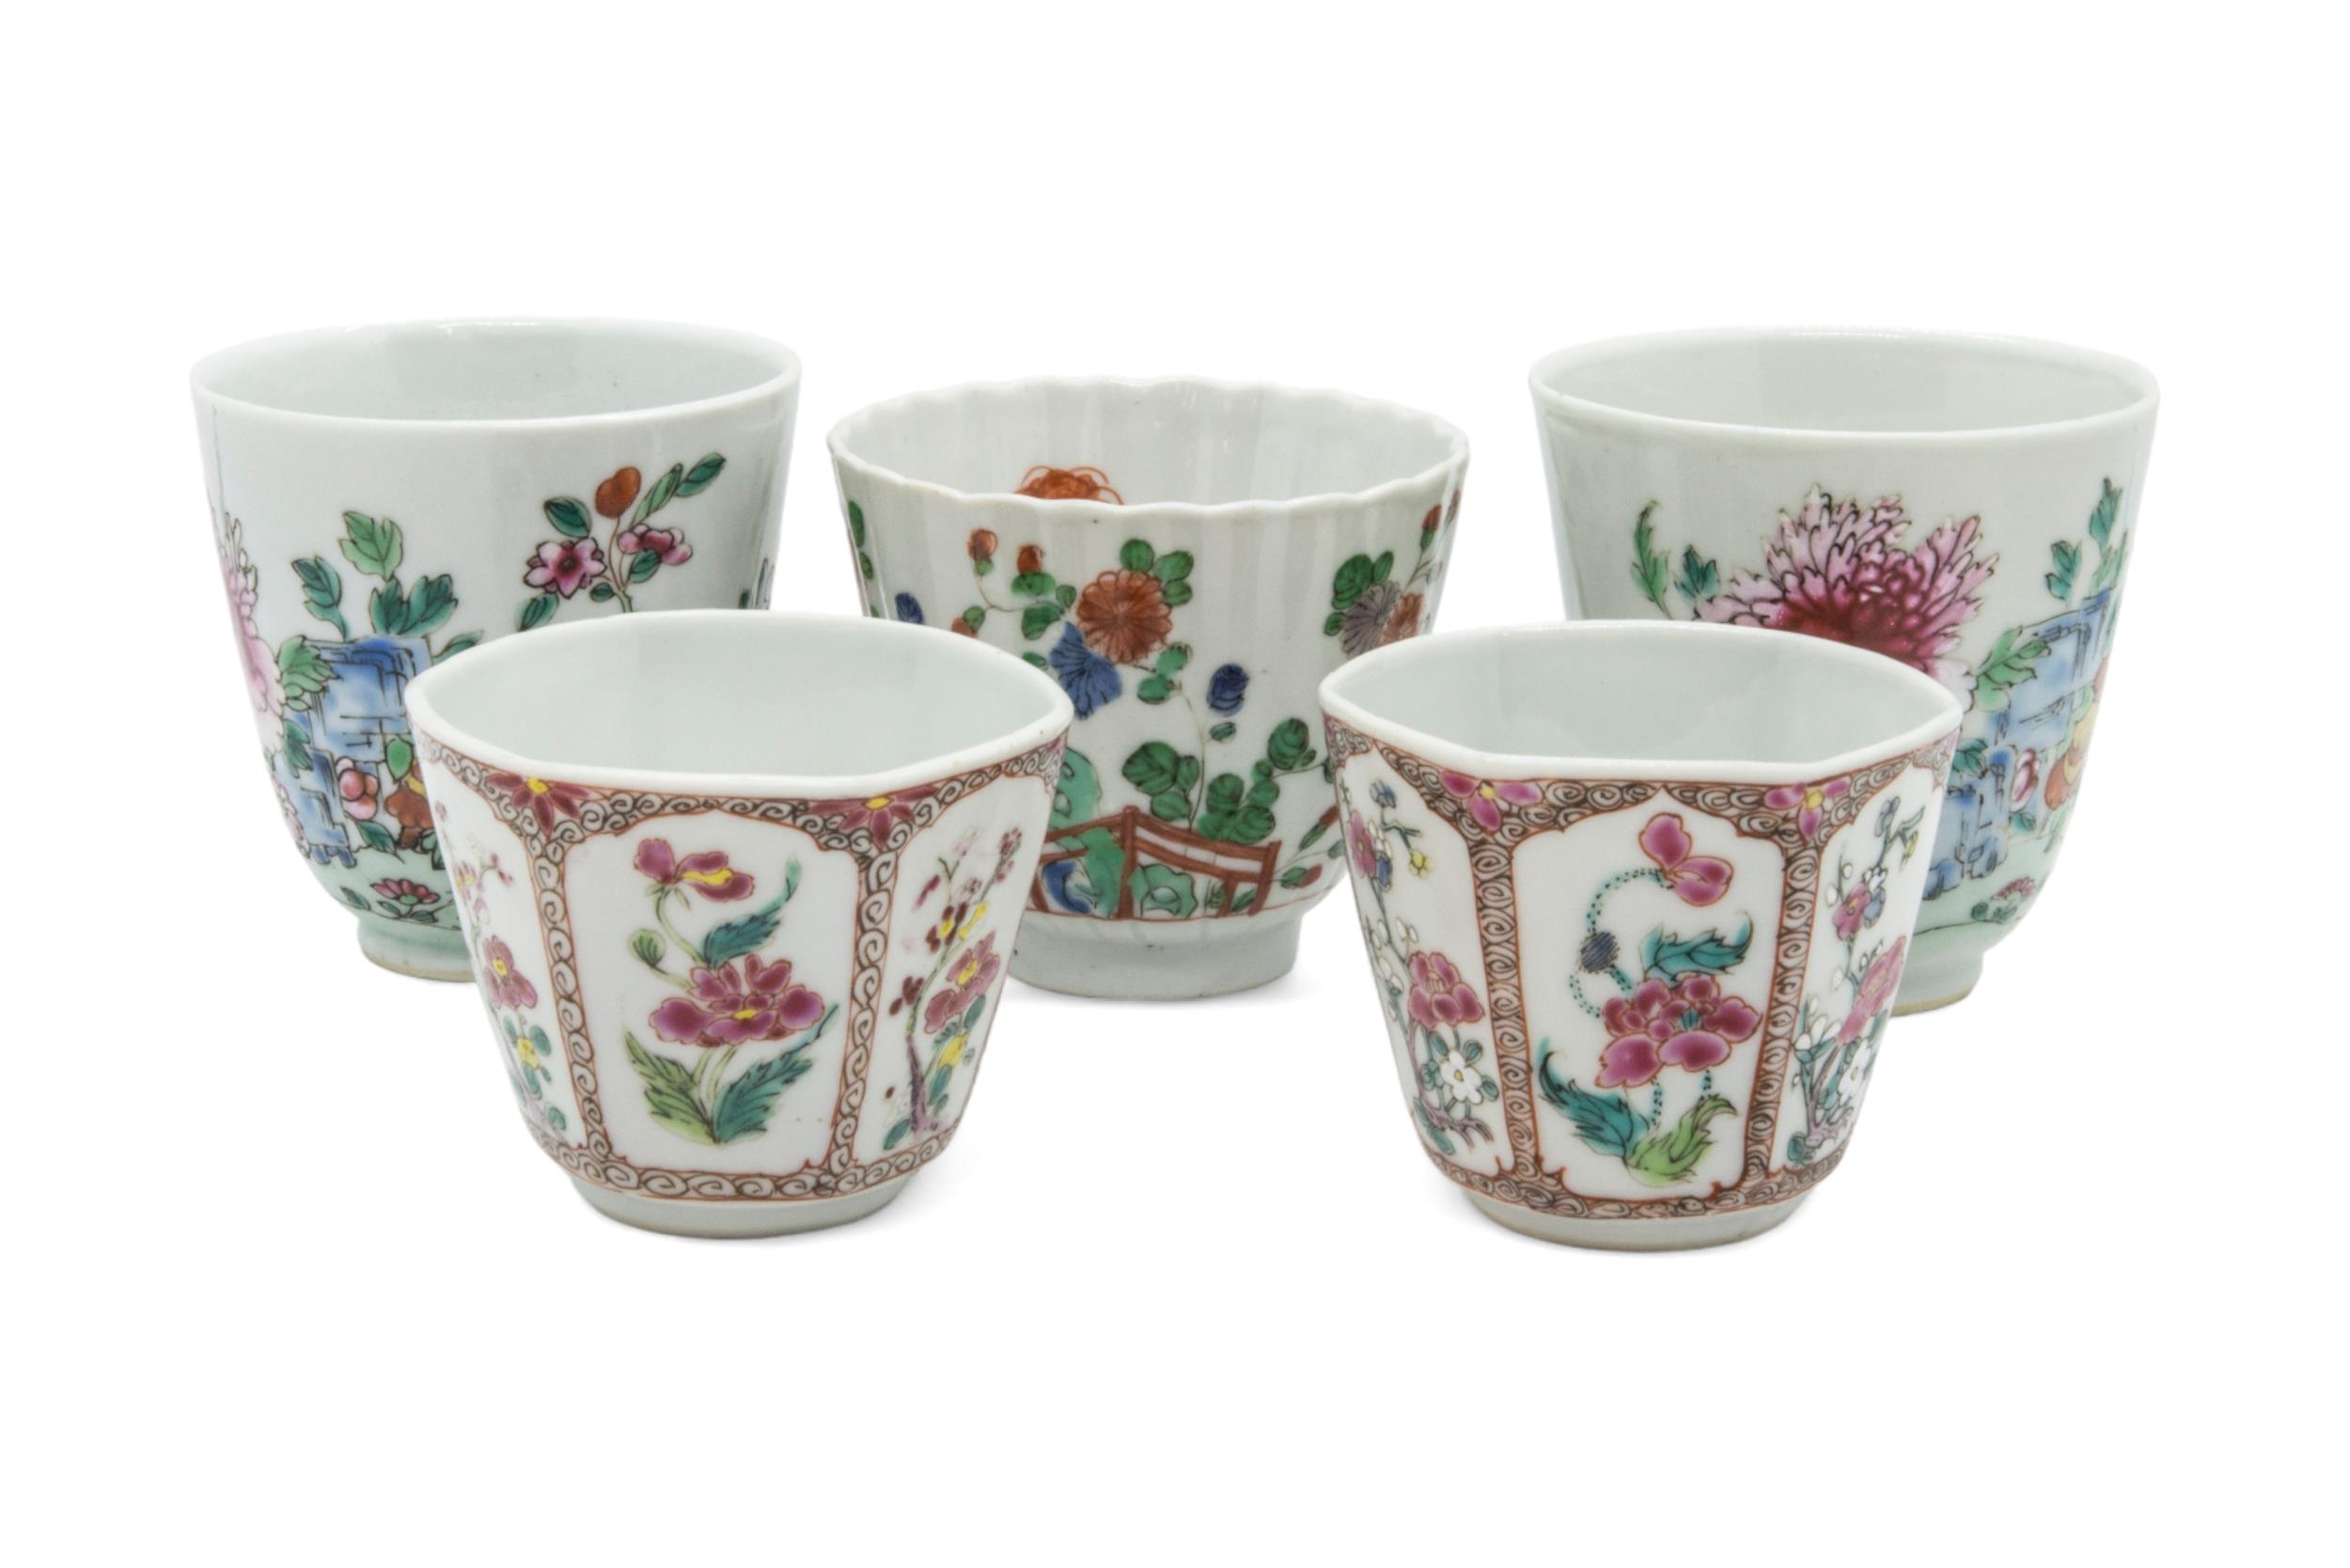 A PAIR OF CHINESE FAMILLE ROSE BEAKERS QING DYNASTY, 18TH CENTURY 7.5cm high; together with A